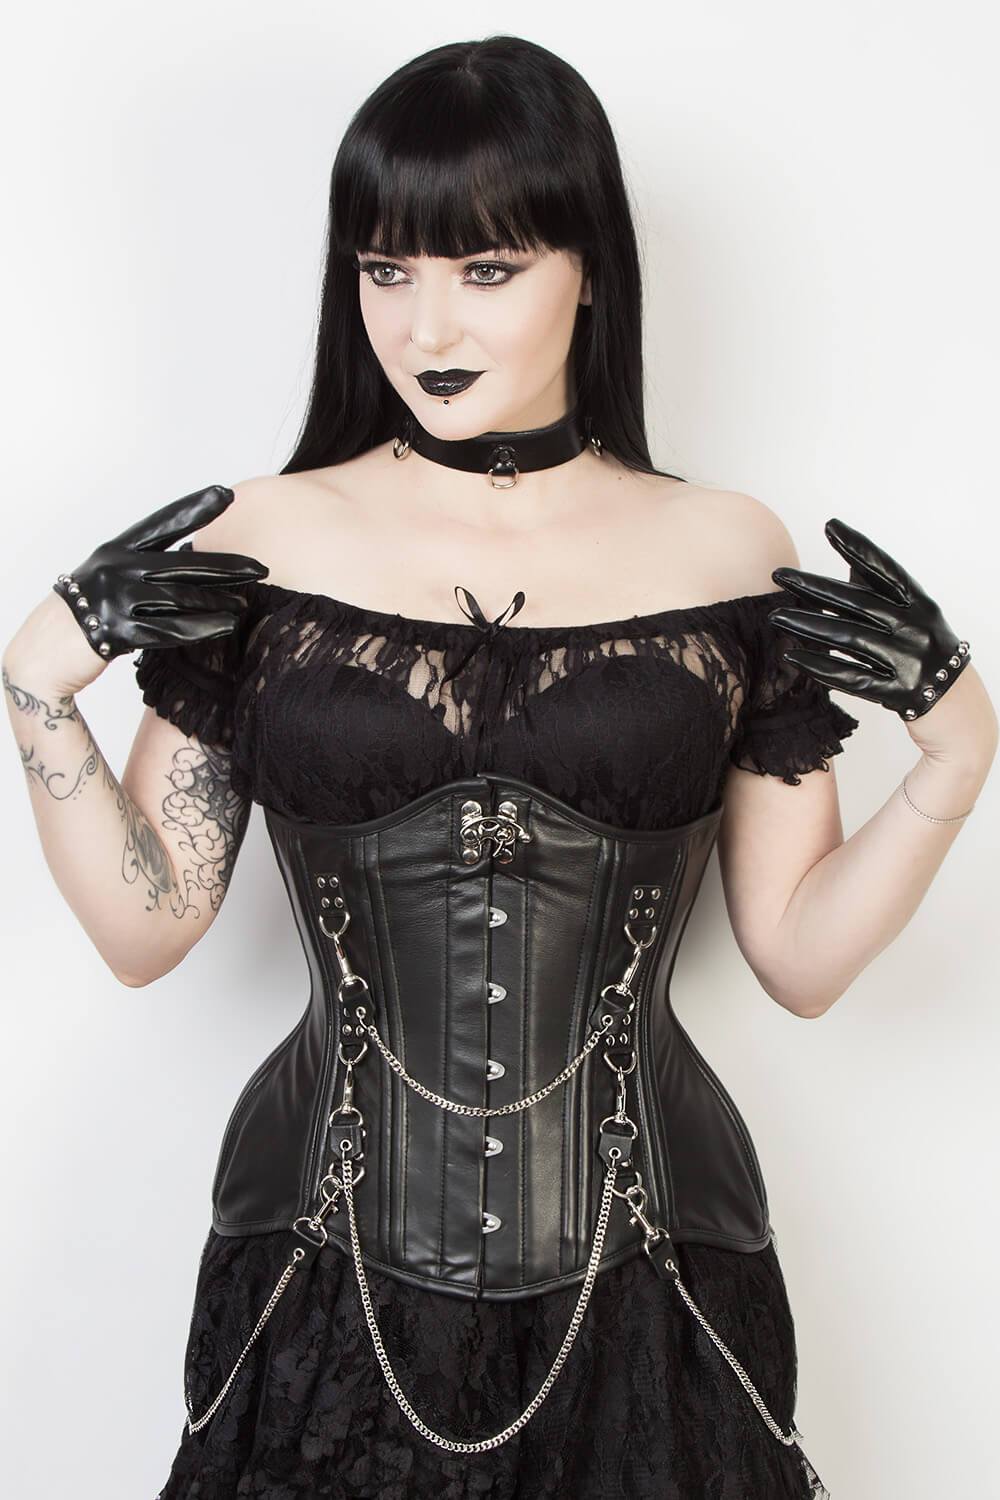 corset and basque, tight waist trainer